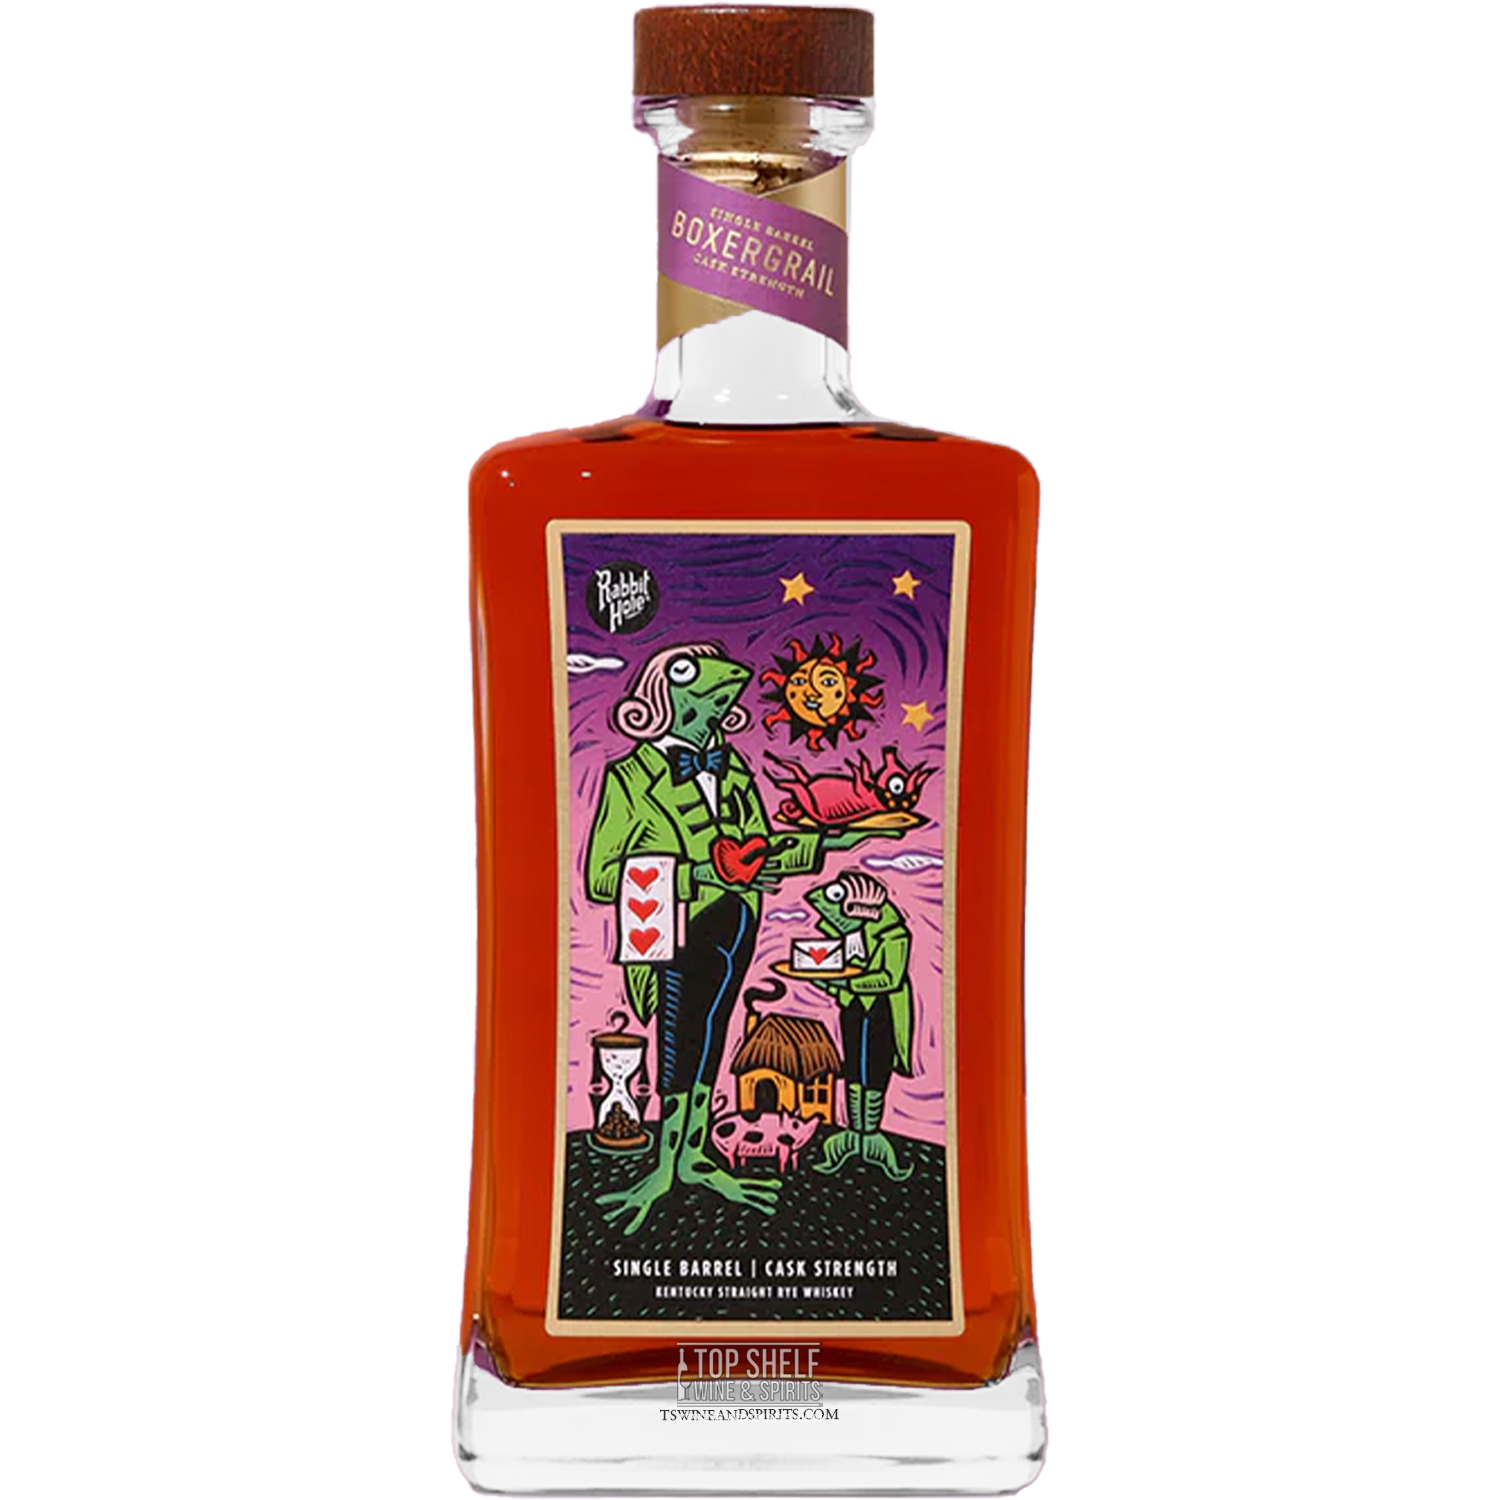 Rabbit Hole BoxerGrail Cask Strength Limited Edition Art Series - Frog